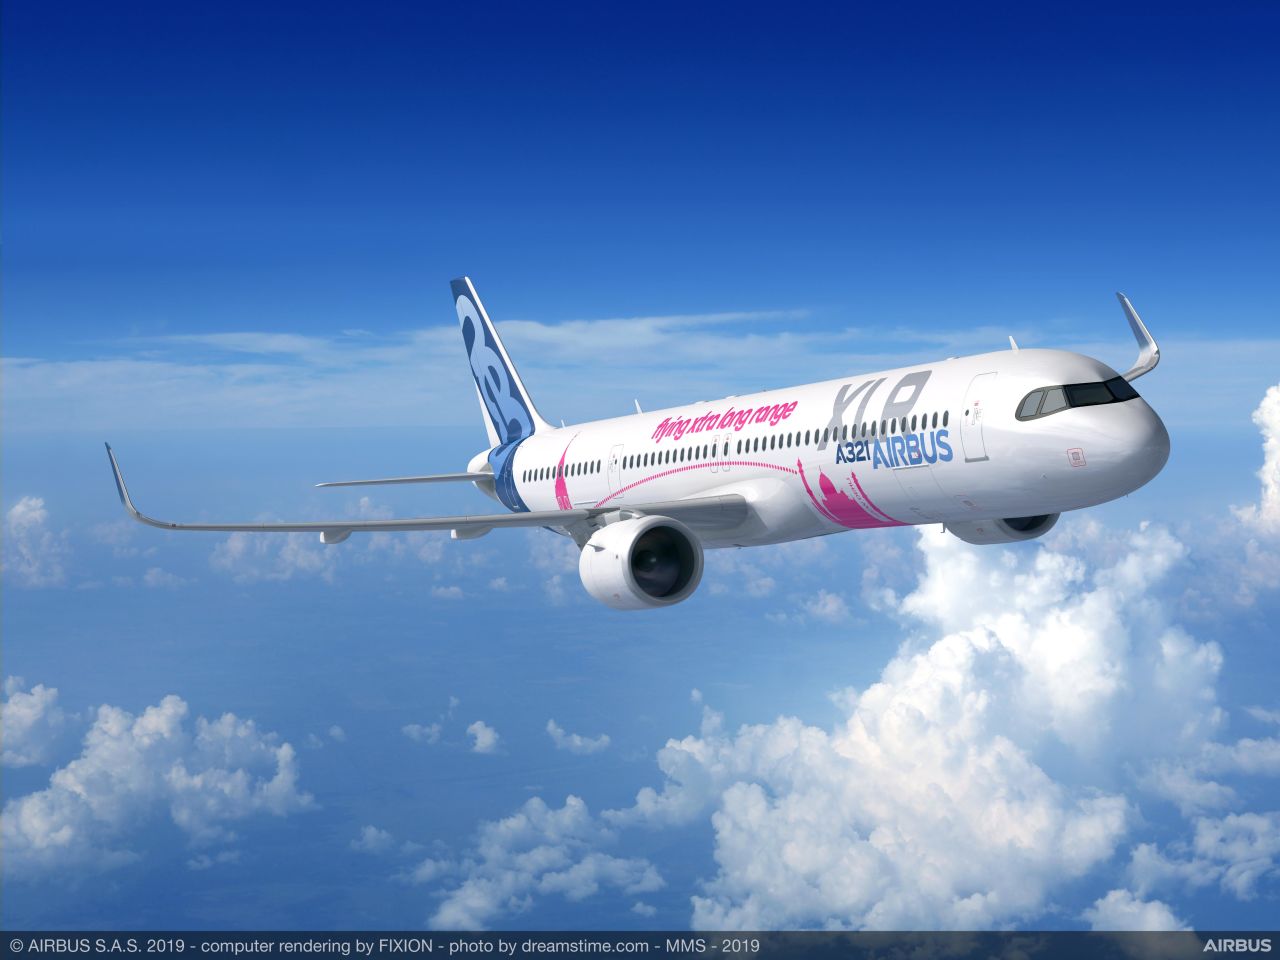 <strong>Airbus A321XLR: </strong>The 2019 Paris Air Show saw the launch of the Airbus A321XLR, which provides extra-long range in a smaller aircraft.